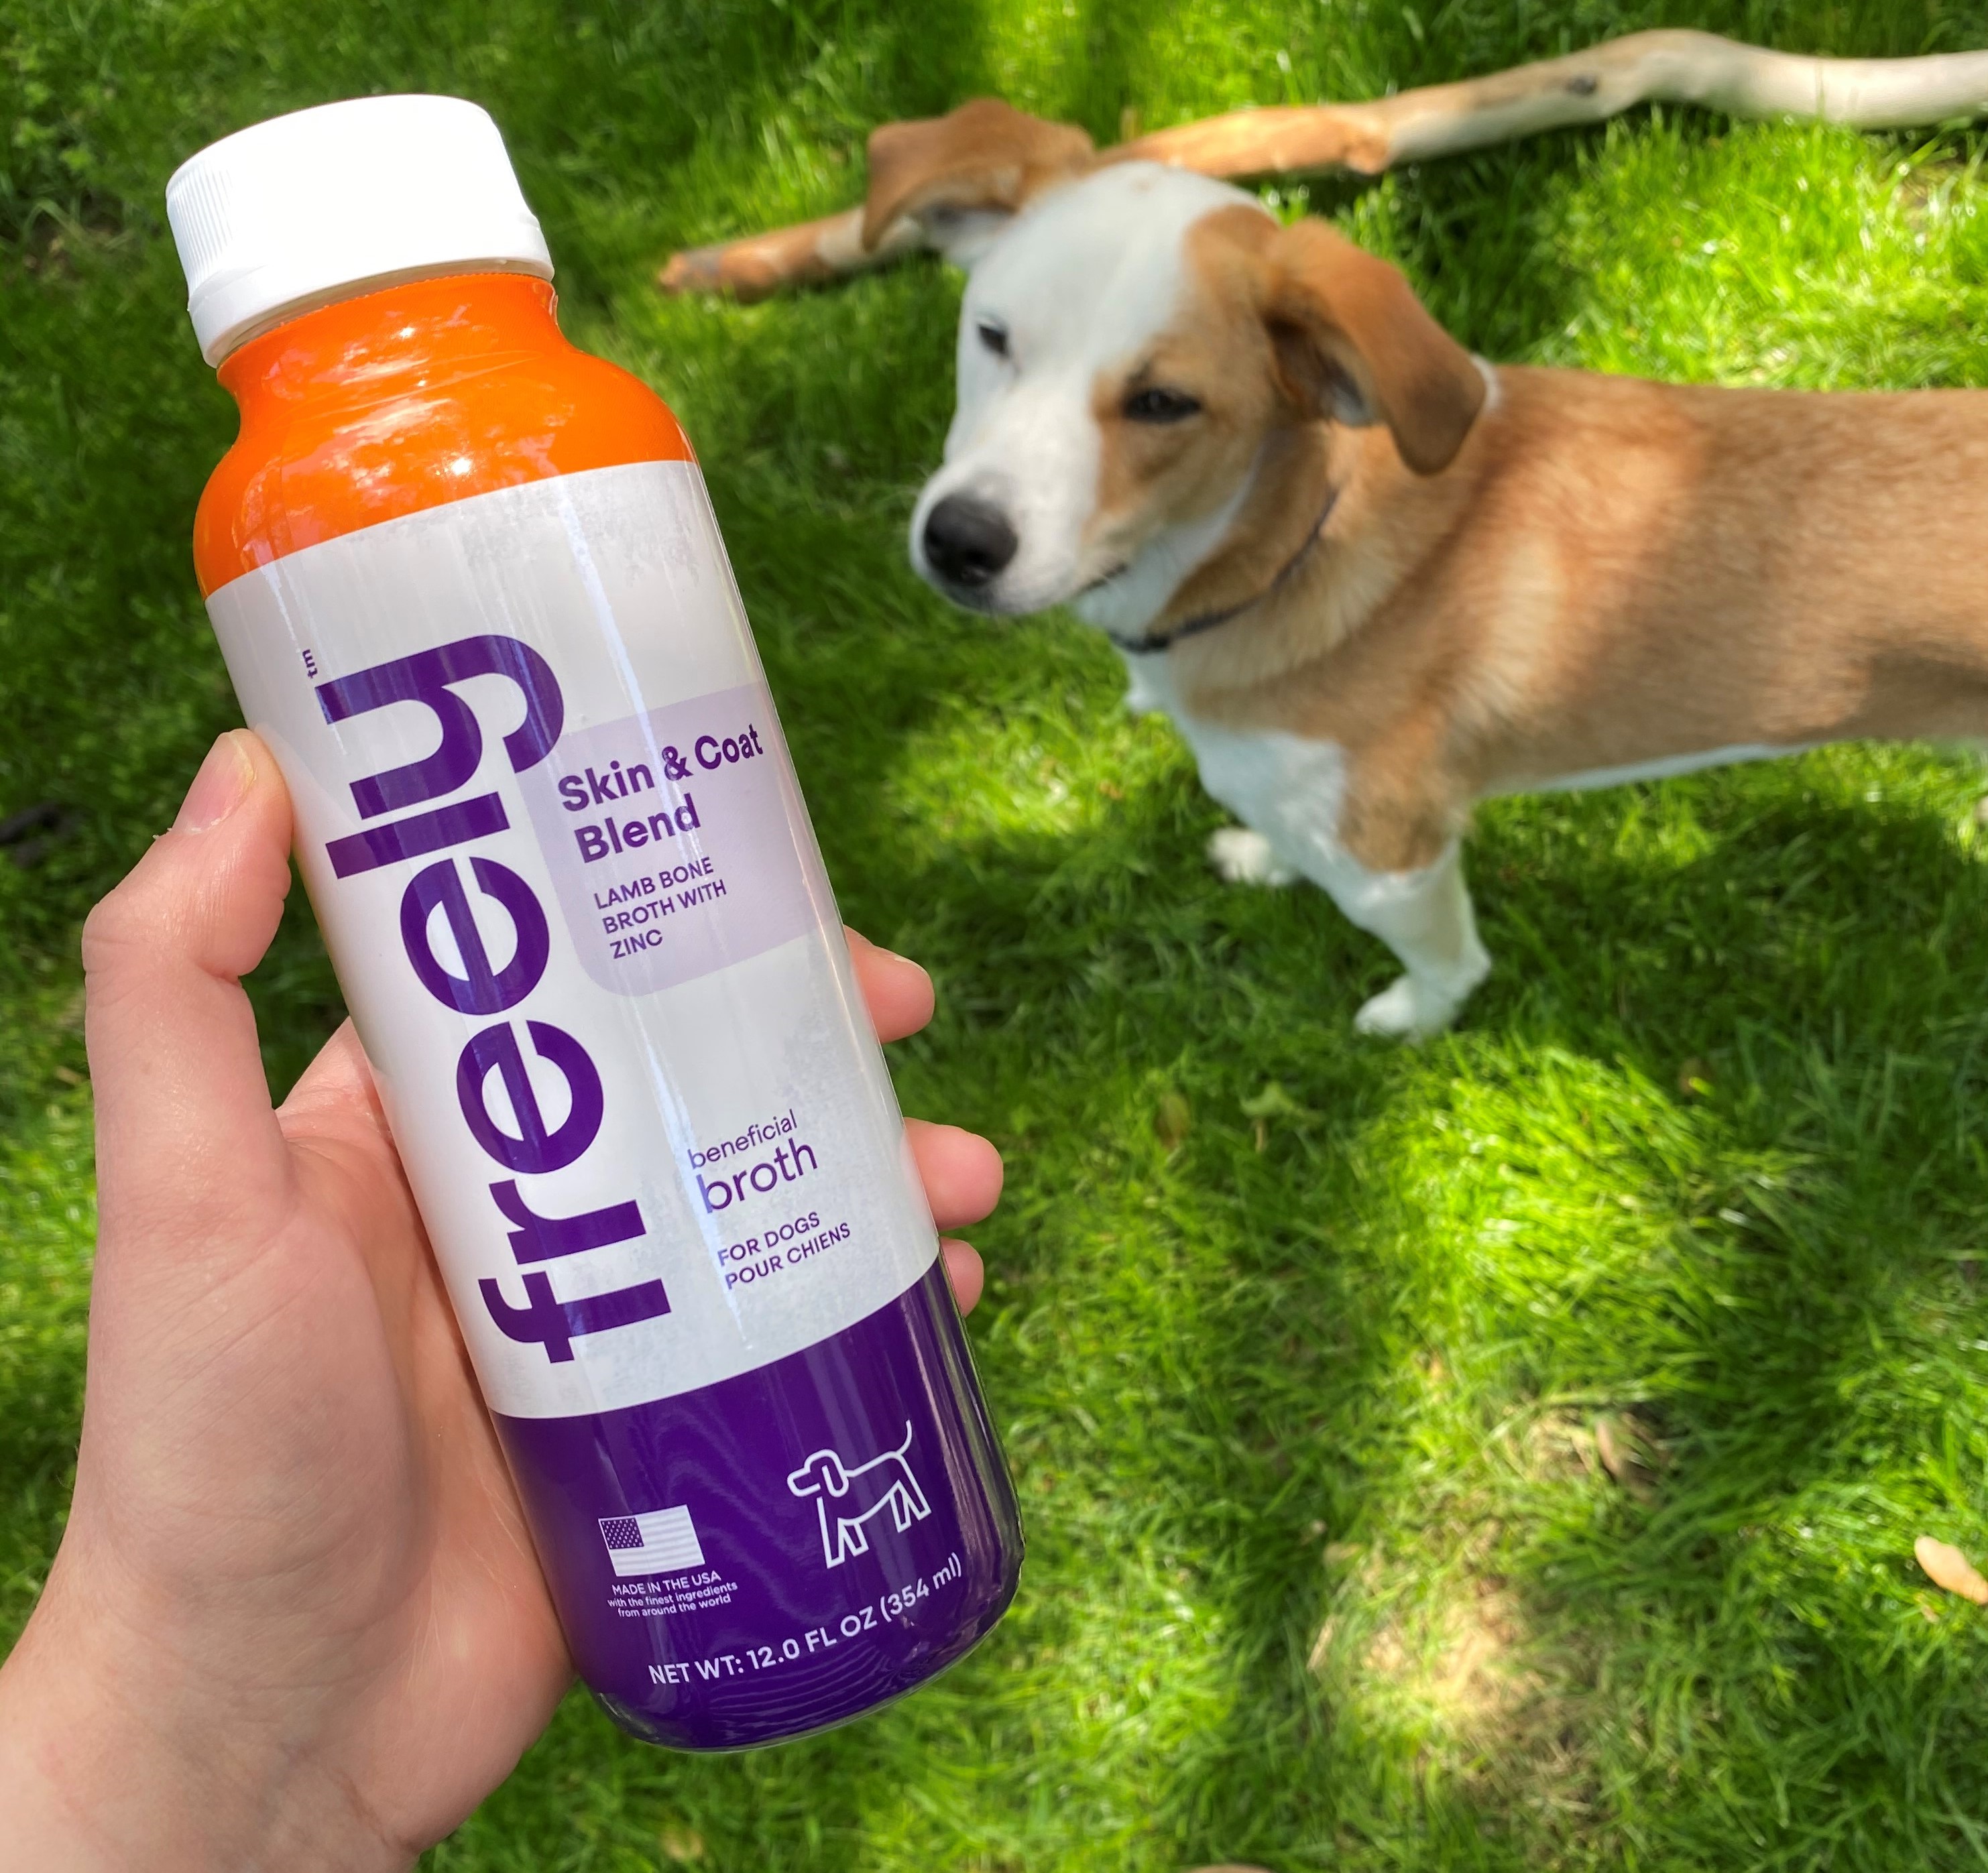 Freely Bone Broth Toppers Will Be Available for Sale at All Best Friends Pet Hotels